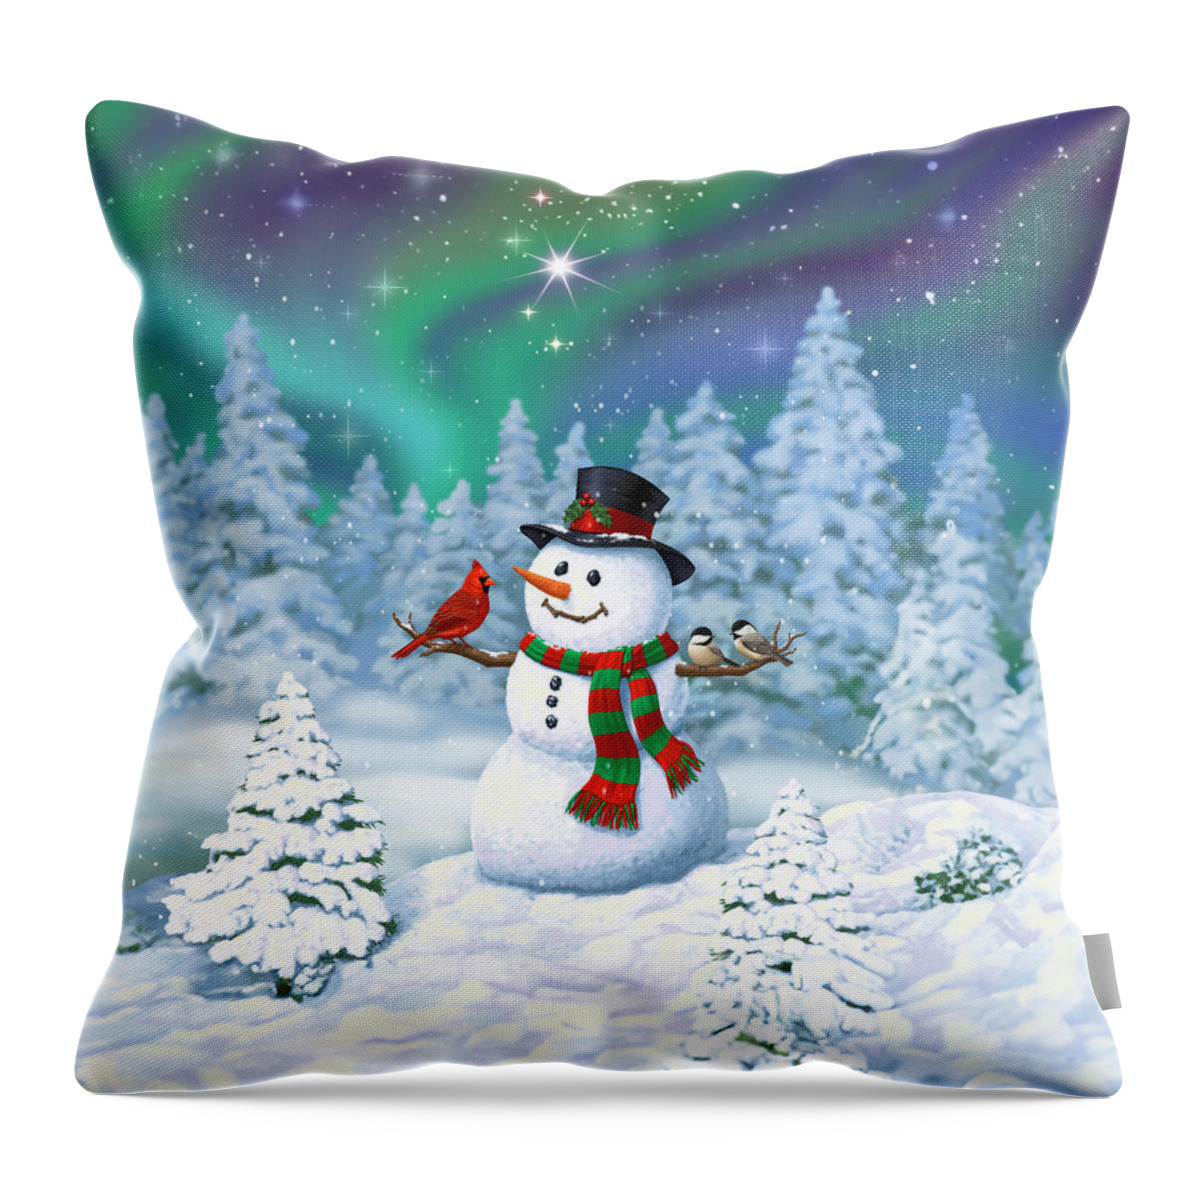 Winter Wonderland Throw Pillow featuring the painting Sharing The Wonder - Christmas Snowman and Birds by Crista Forest